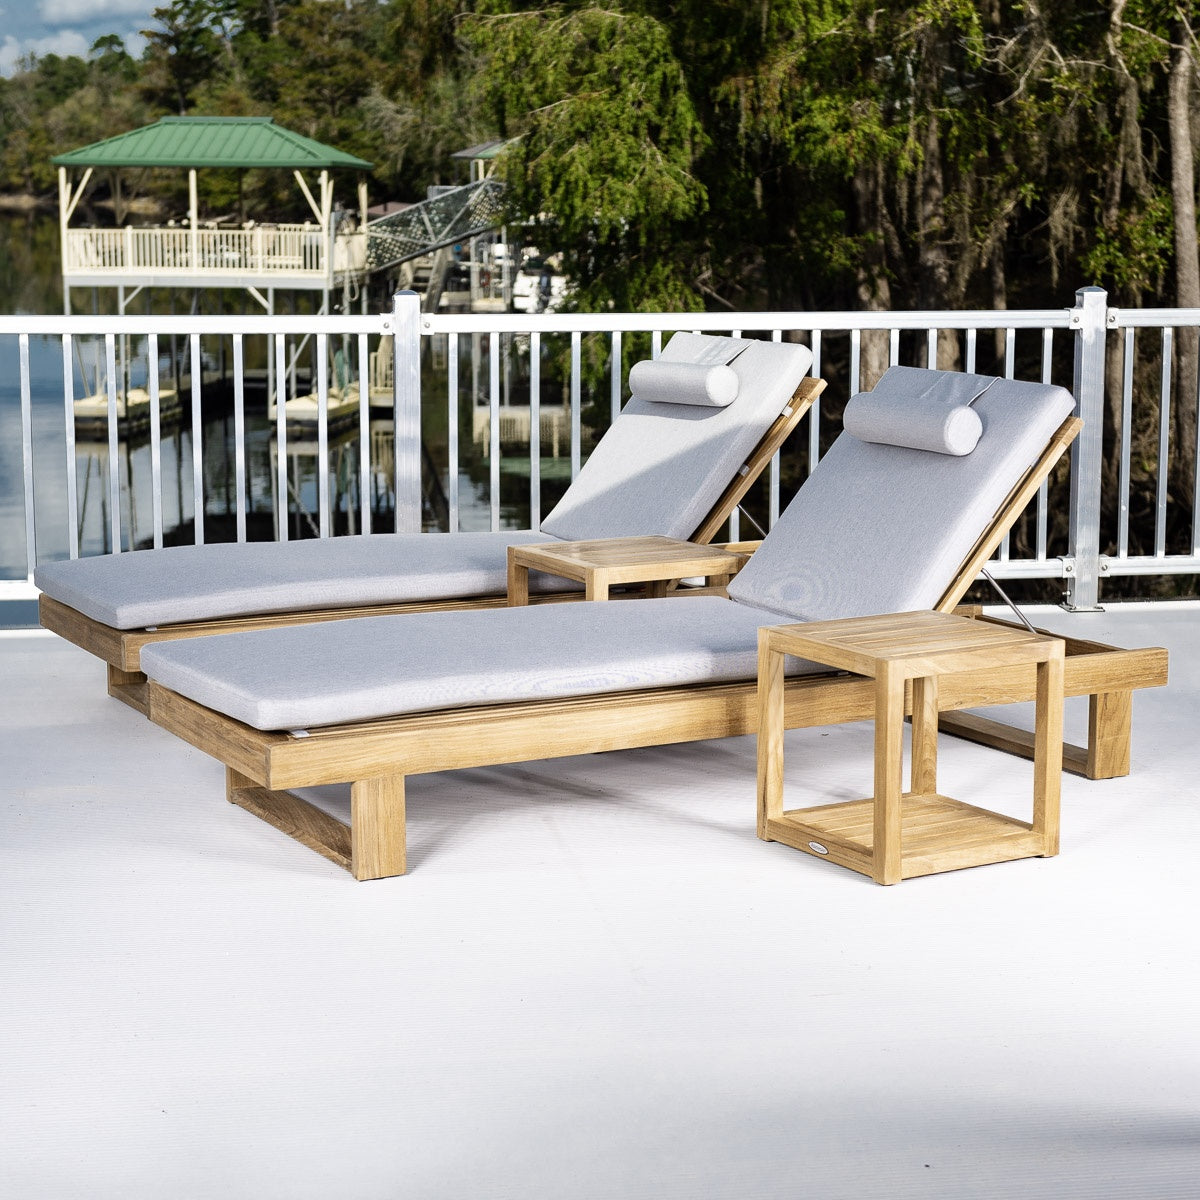 Westminster Teak - Horizon Double Chaise and Side Table Set - 70309